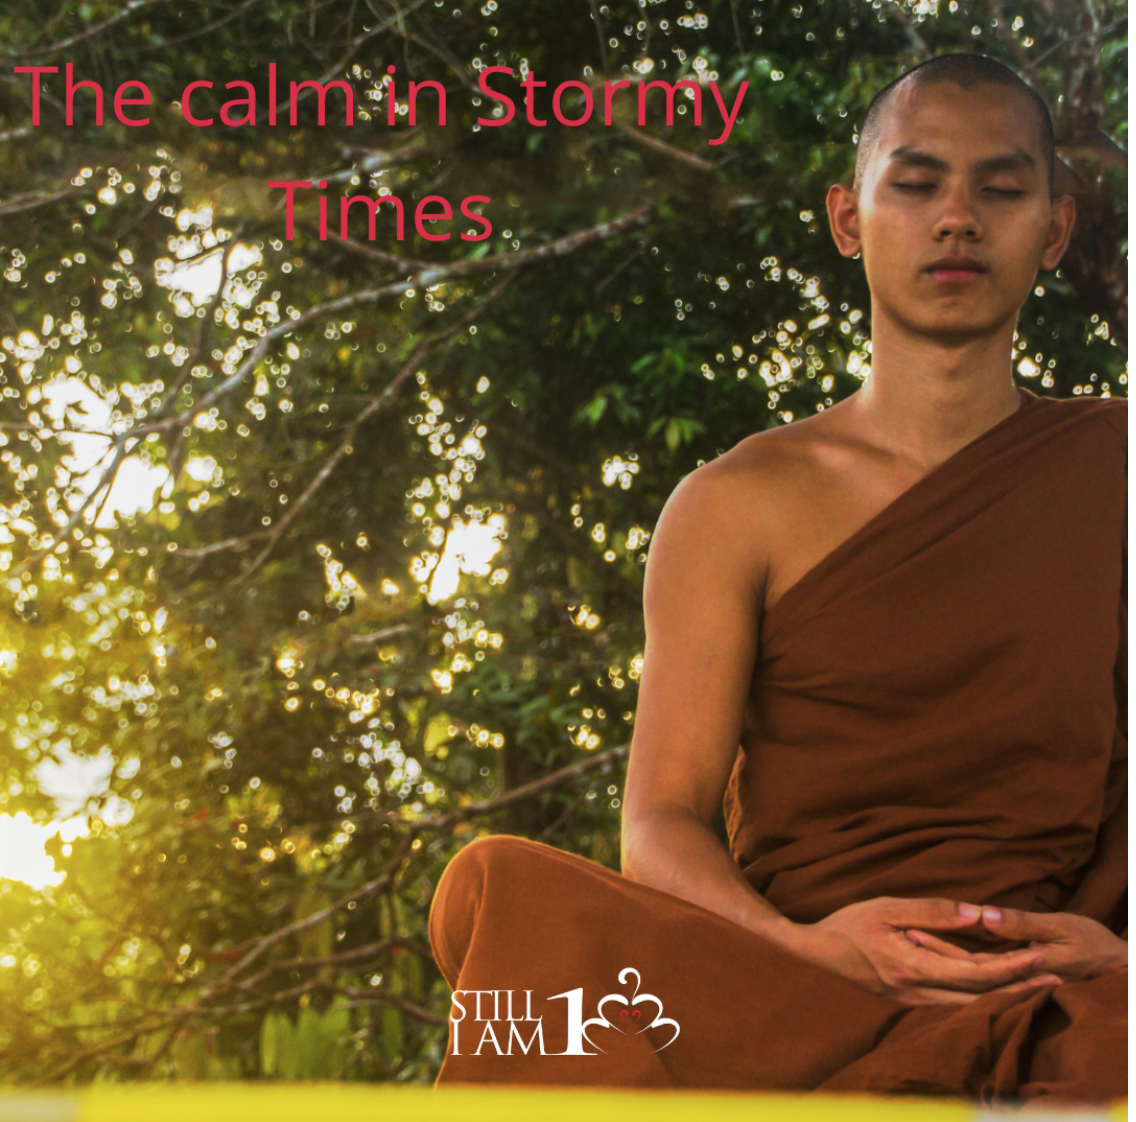 Monk meditating with his eyes closed in front of trees. Text says "The Calm in Stormy Times"